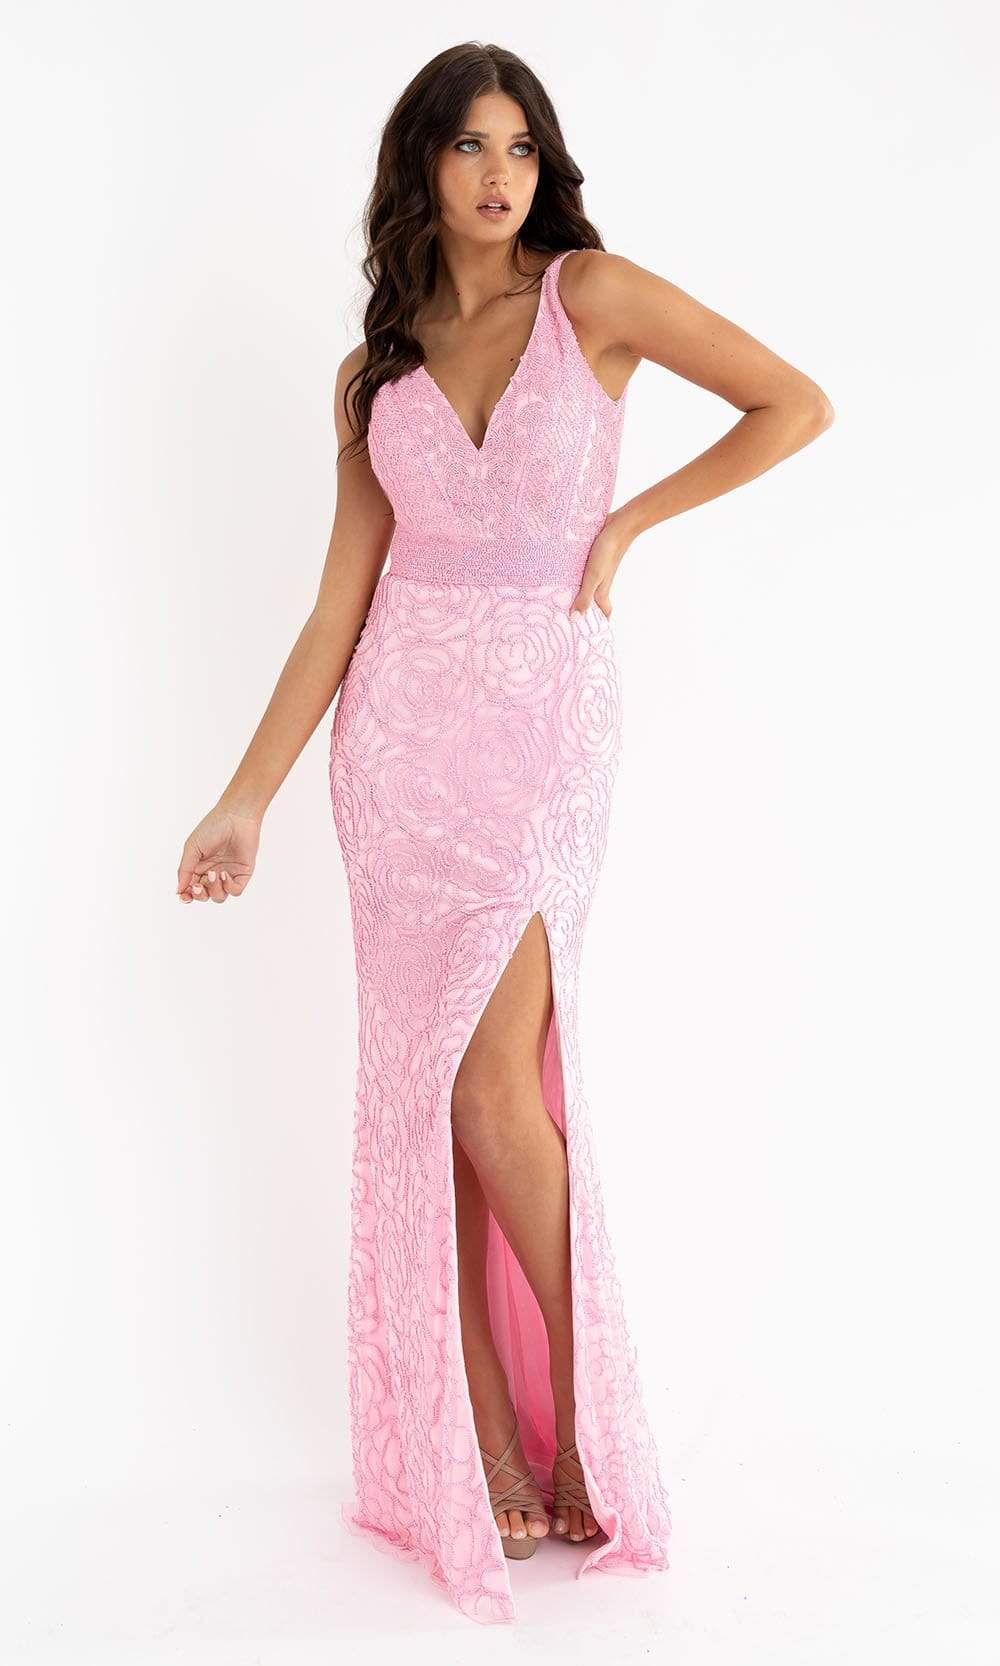 Primavera Couture - 3723 V-Neck Floral Pattern Beaded Gown Special Occasion Dress 00 / Pink